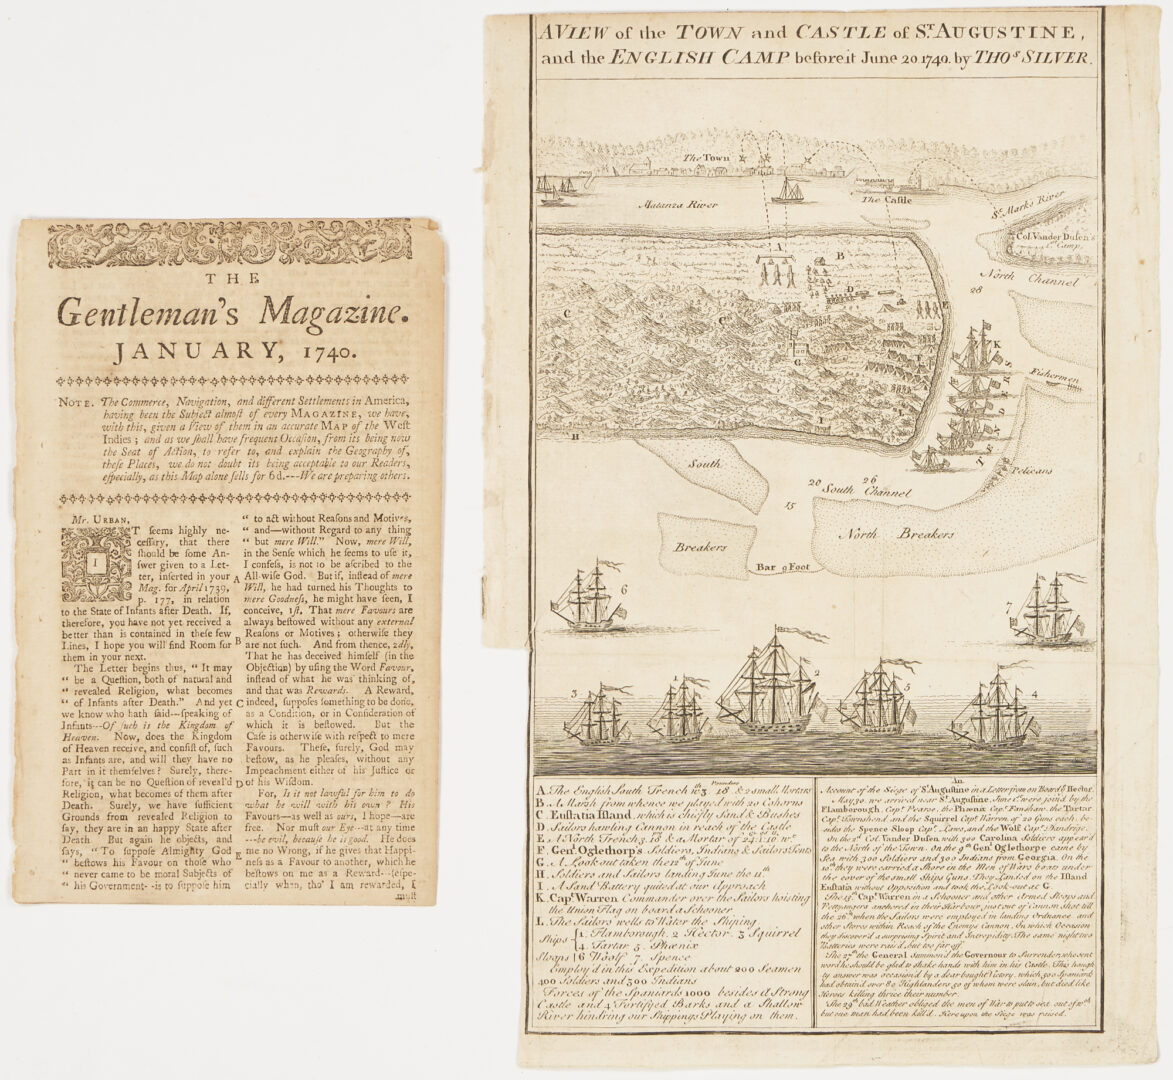 Lot 549: 4 Early Florida Maps, incl. St. Augustine & Bowen